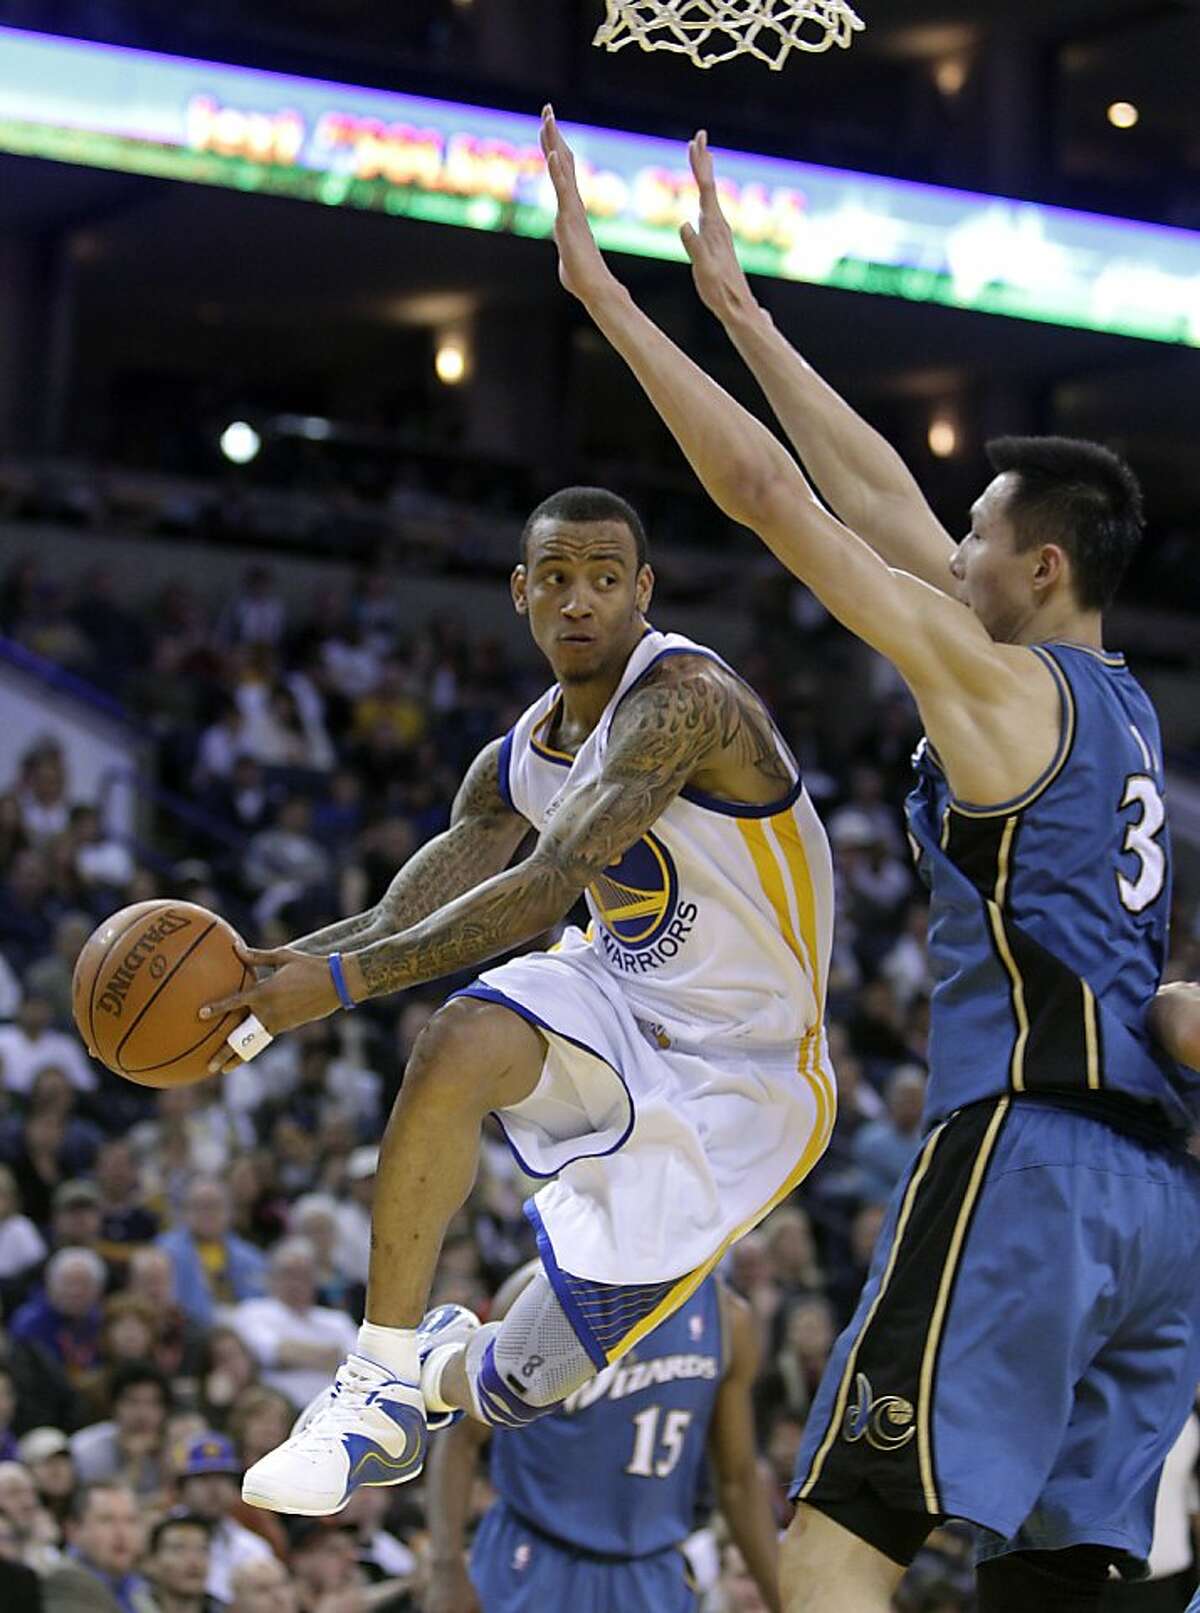 Golden State Warriors' Monta Ellis, left, looks to pass away from Washington Wizards' Yi Jianlian, of China, during the first half of an NBA basketball game, Sunday, March 27, 2011, in Oakland, Calif.